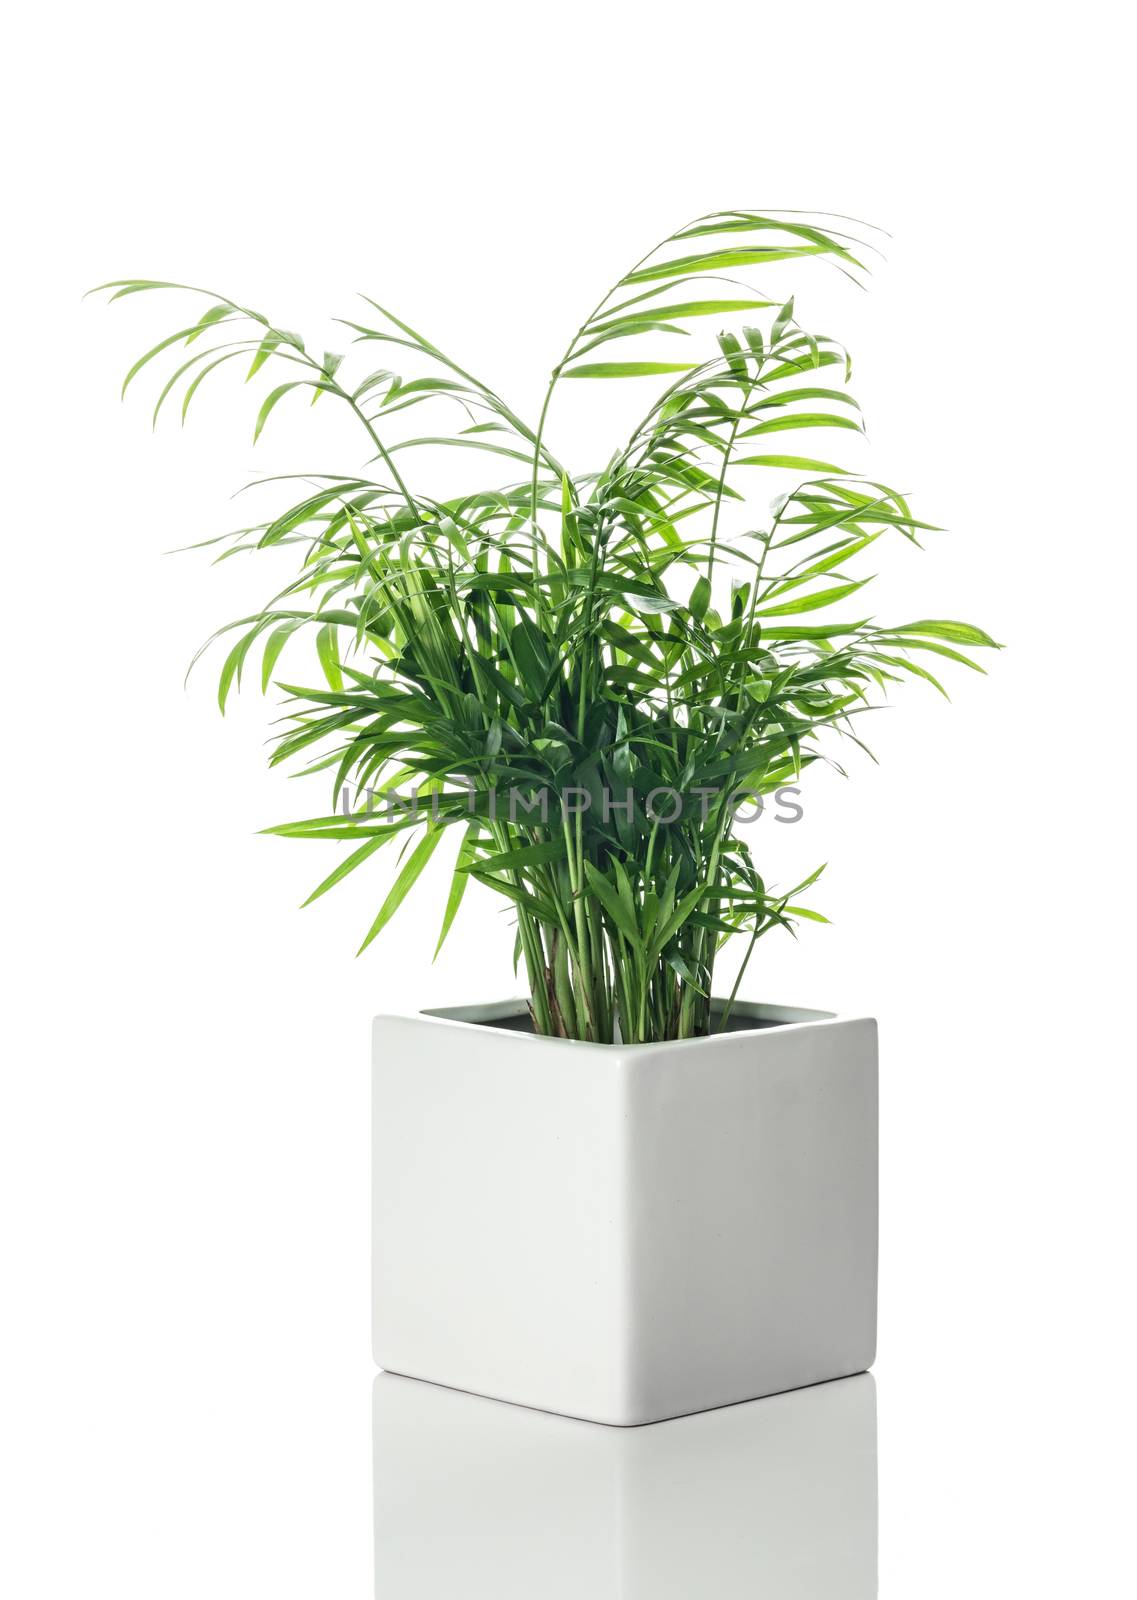 Beautiful Parlor palm in a white ceramic pot, with reflection, on white background.